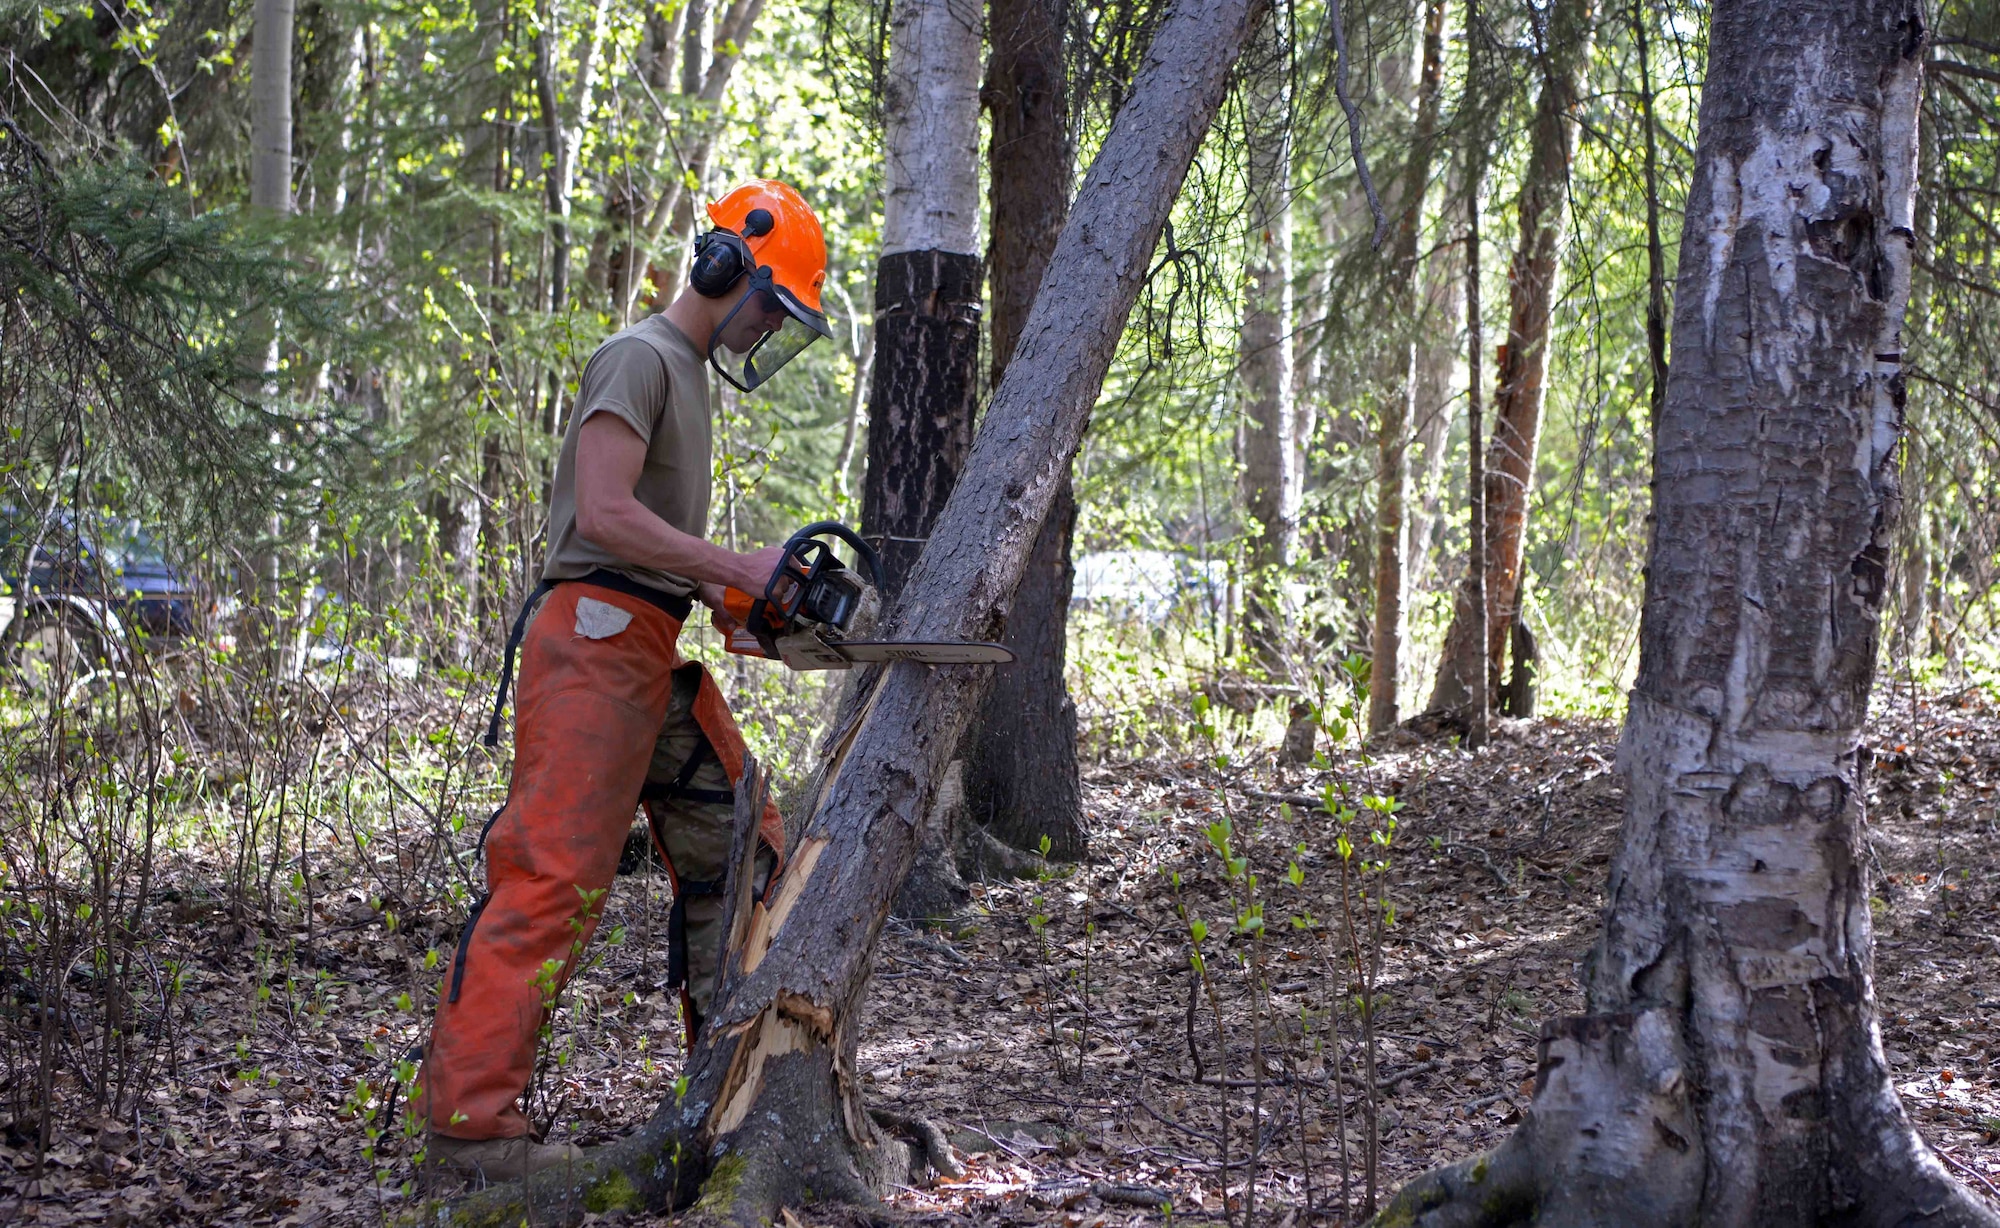 A U.S. Air Force Airman assigned to the 354th Civil Engineer Squadron cuts a dead tree down during a troop training project May 26, 2021, at the Birch Lake Military Recreation Area, Alaska. The renovations to the area included upgrading eight cabins, grading roads, trimming trees, repainting and staining the main building, and installing new fire pits. (U.S. Air Force photo by Senior Airman Beaux Hebert)